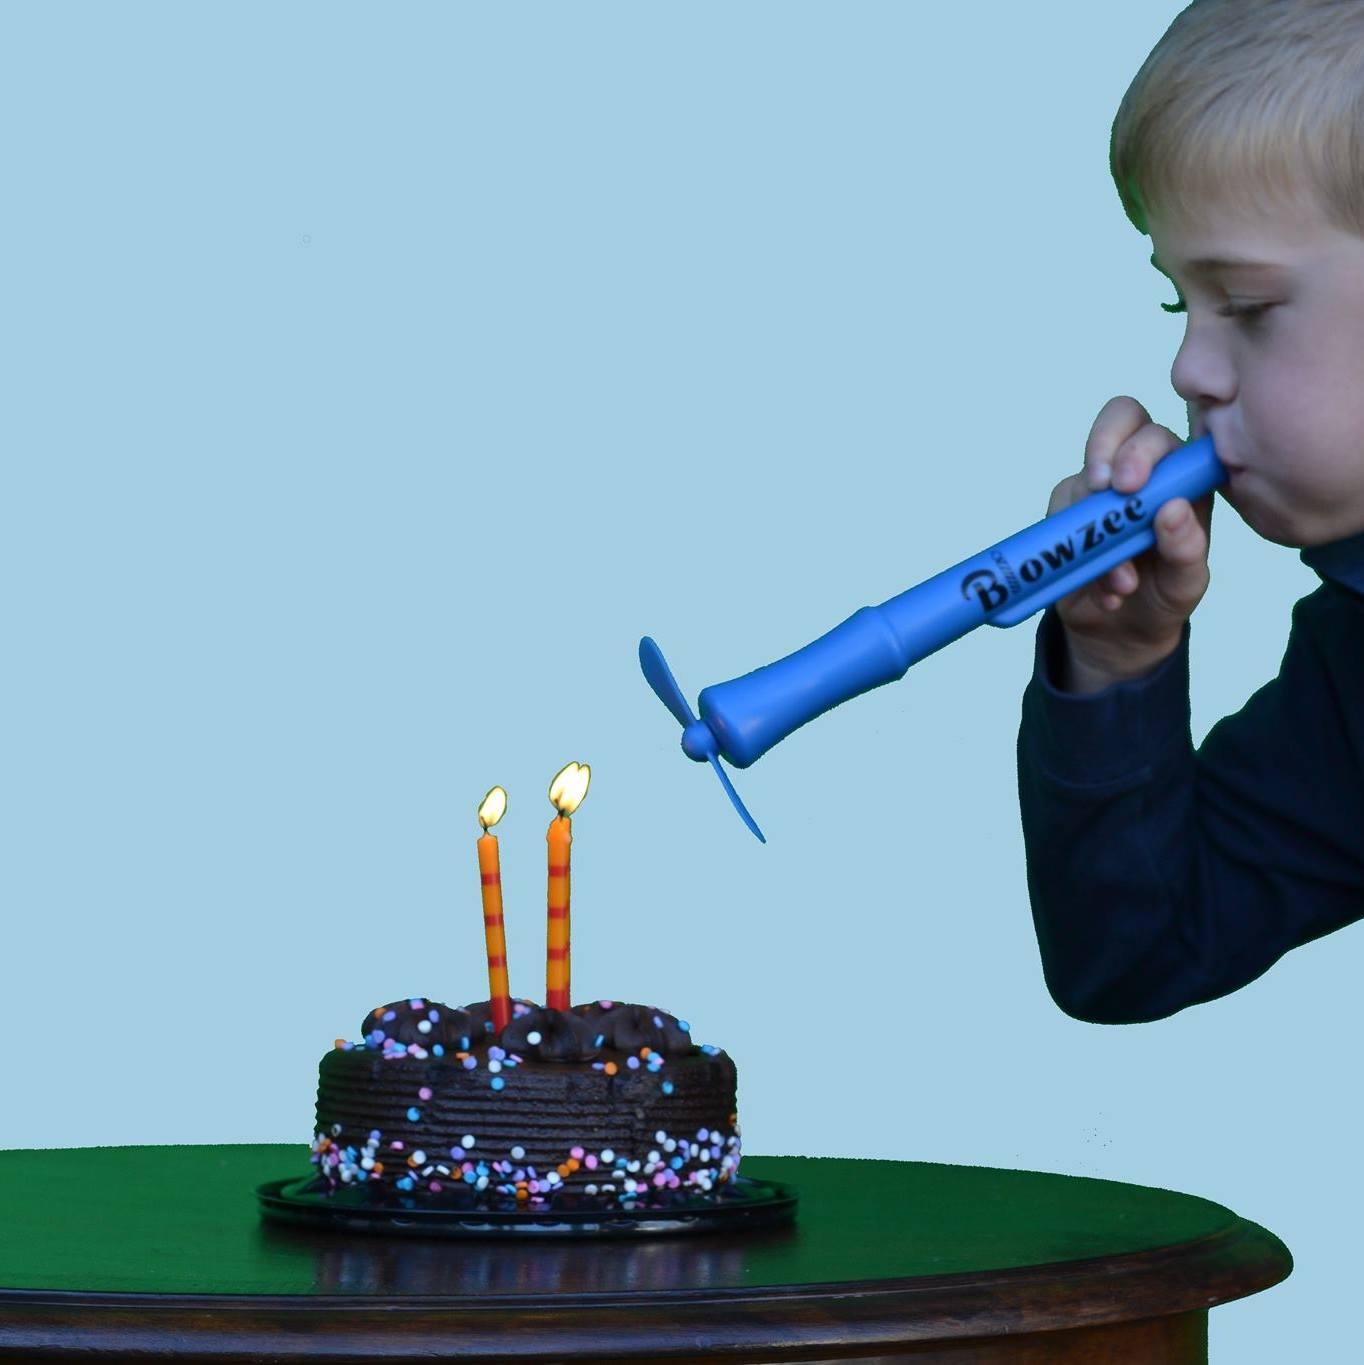 Blowzee Spit Free Cake Candle Blowing Device